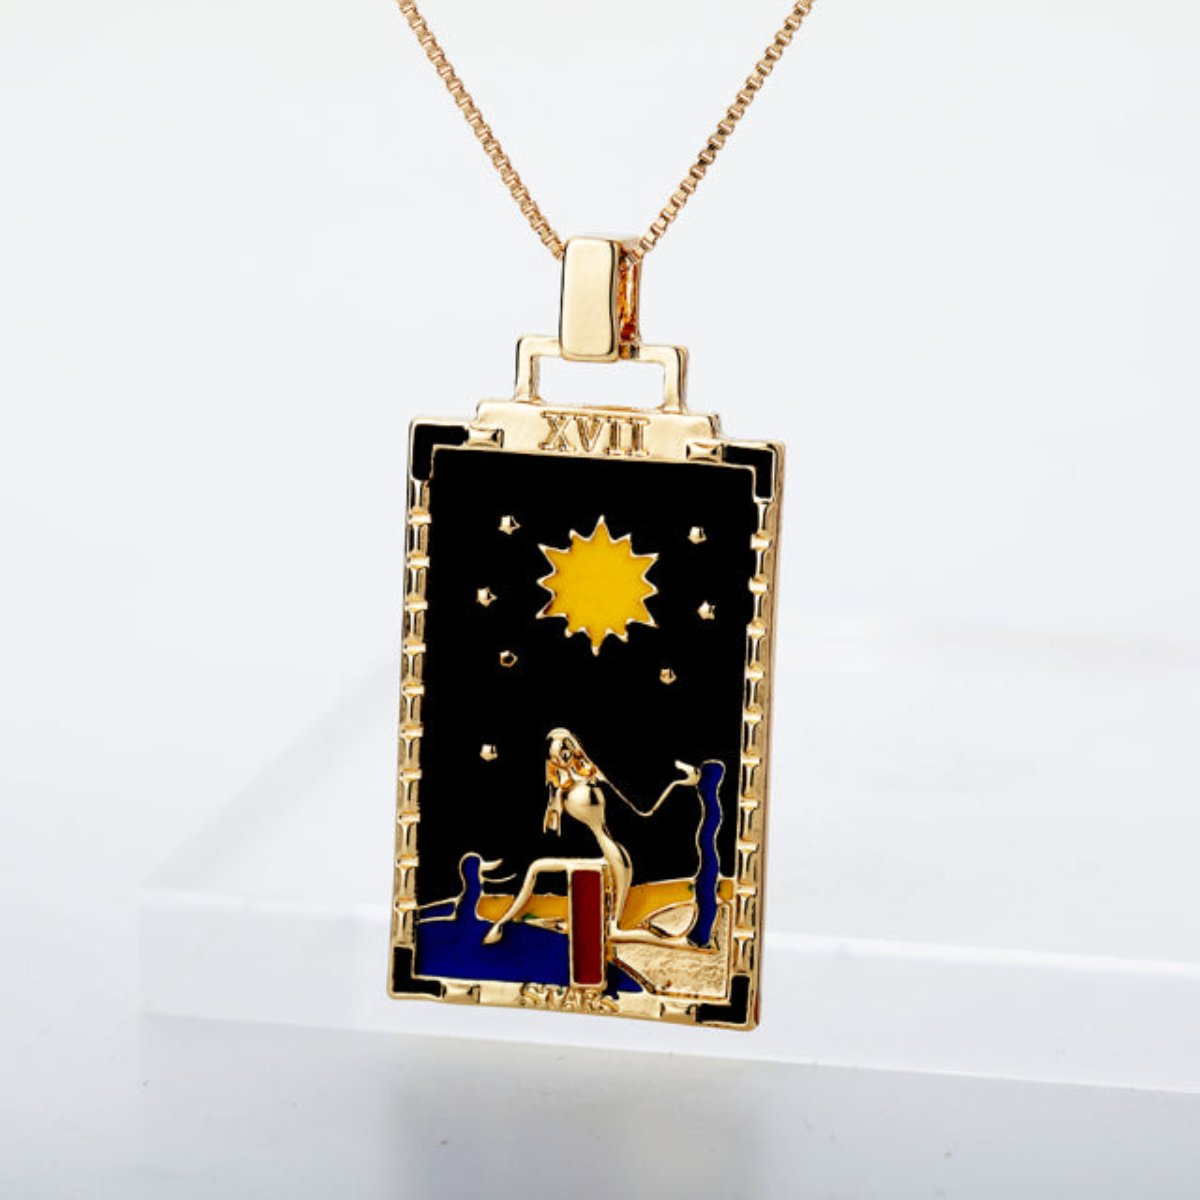 Vintage Colorful Tarot Cards Necklace - Star - Necklaces - Pretland | Spiritual Crystals & Jewelry